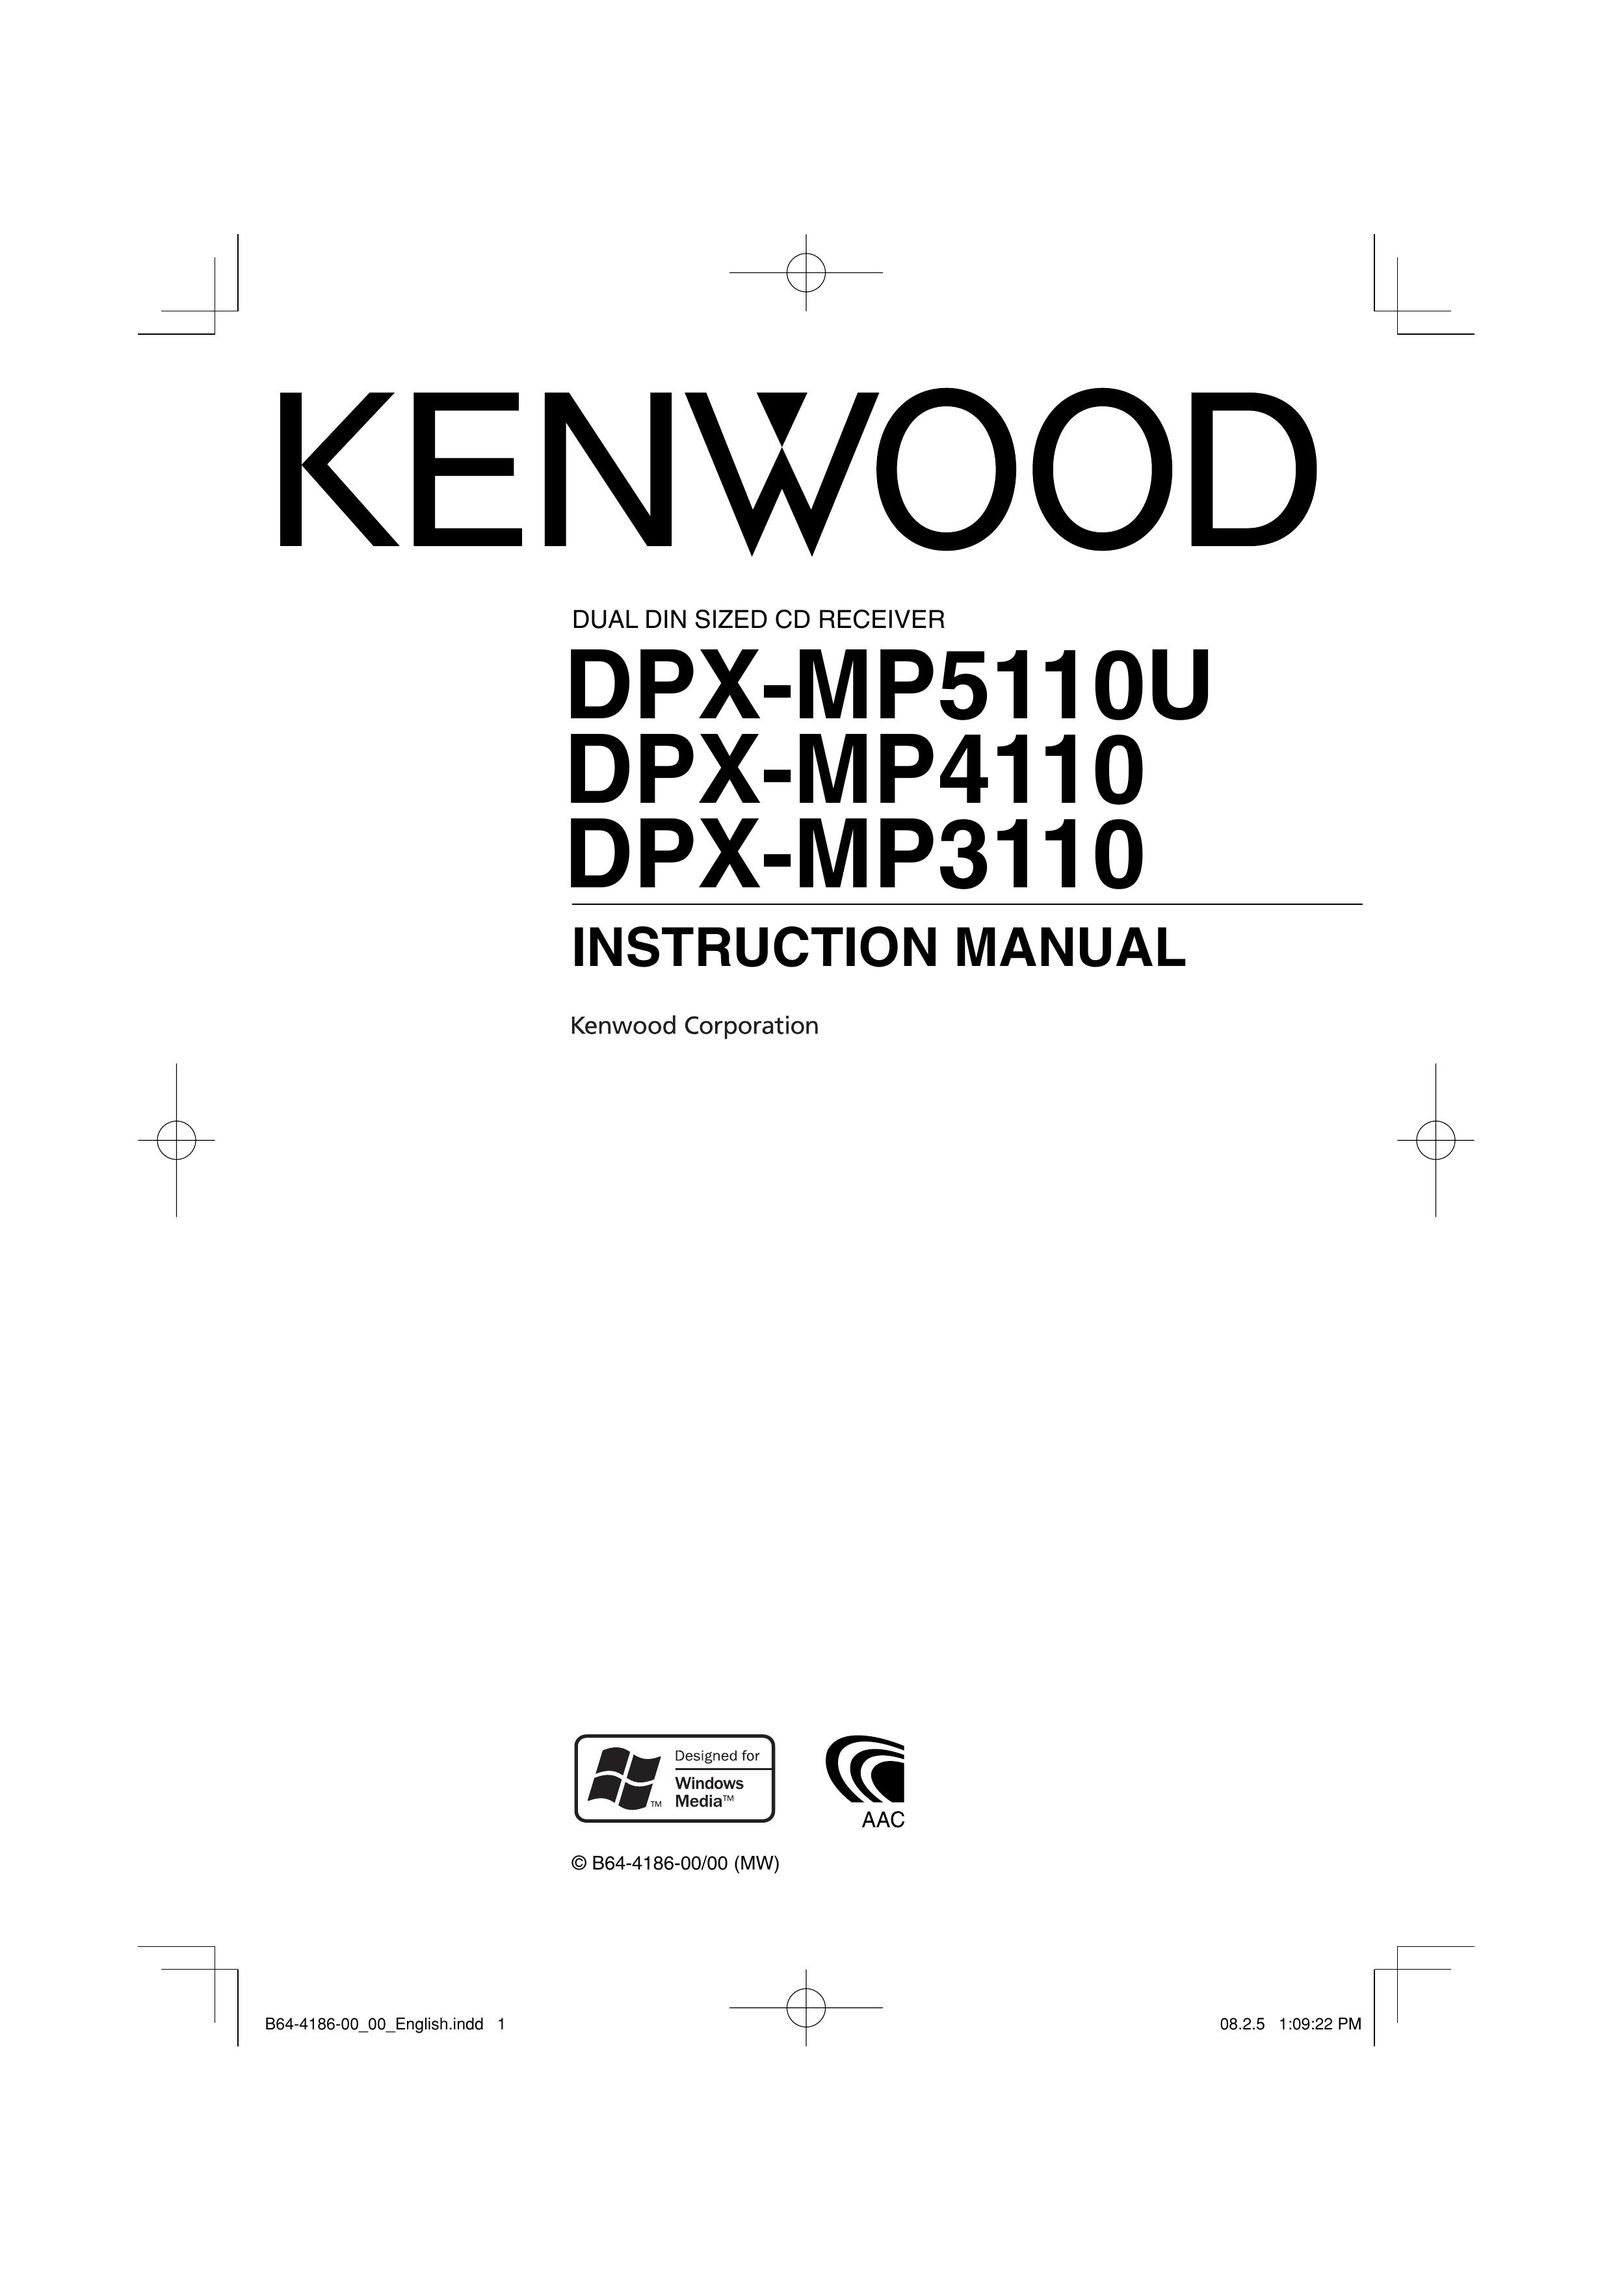 Kenwood DPX-MP3110 Car Stereo System User Manual